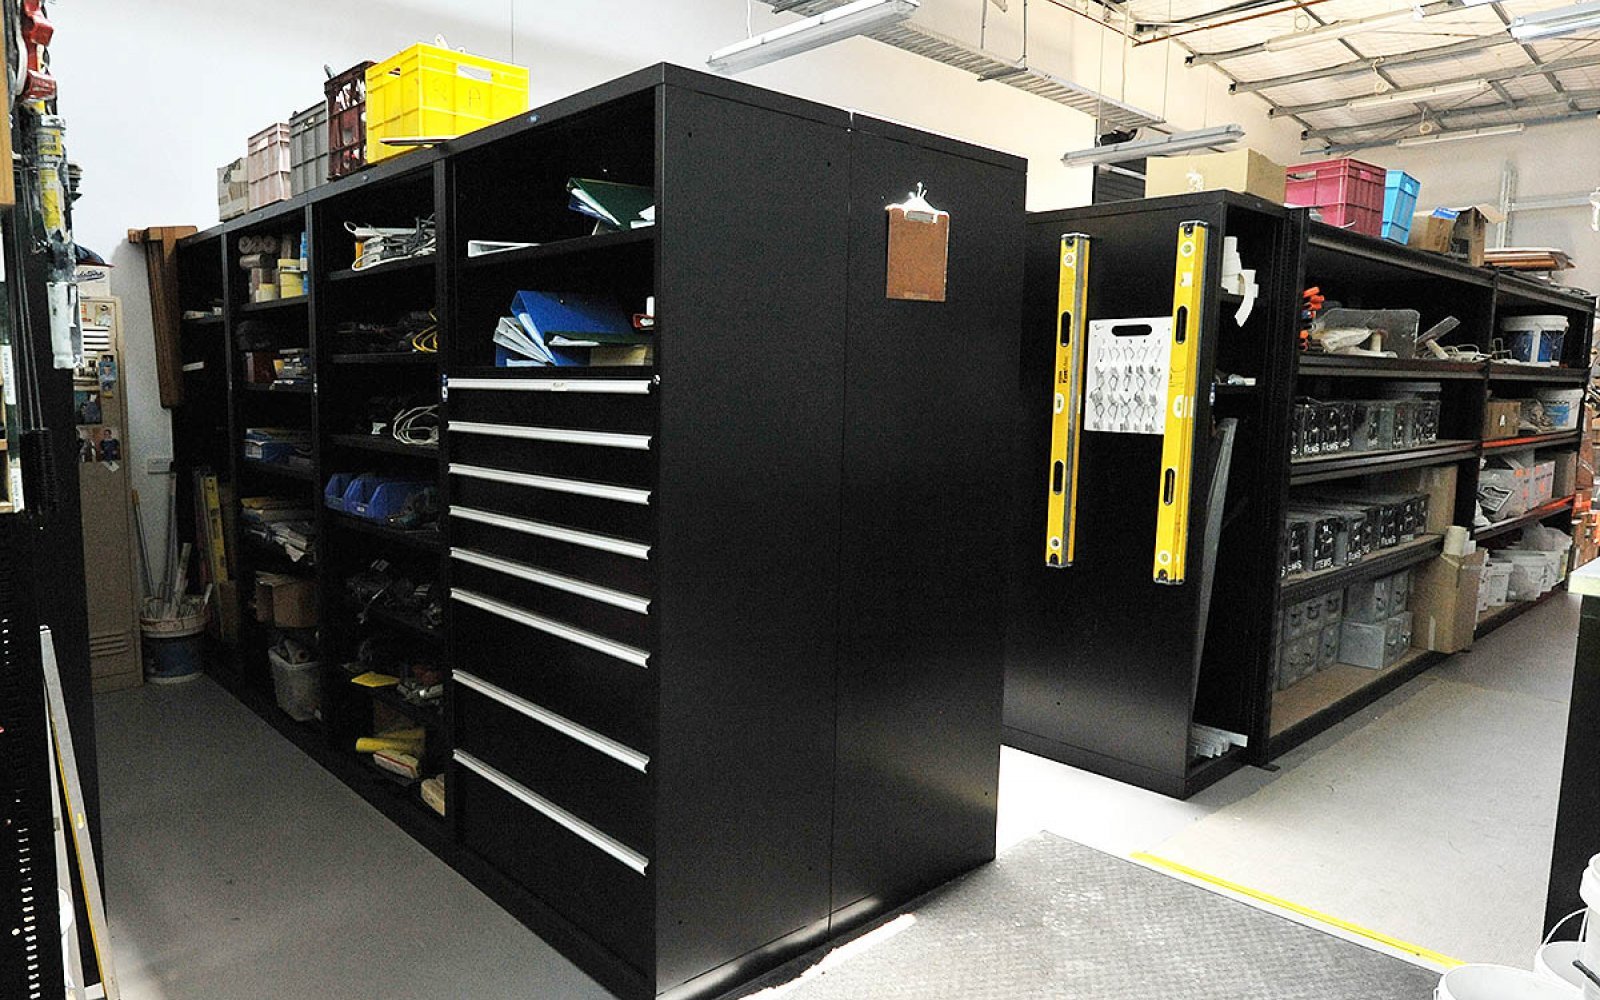 Shelving Modules for Storage of Spare Parts